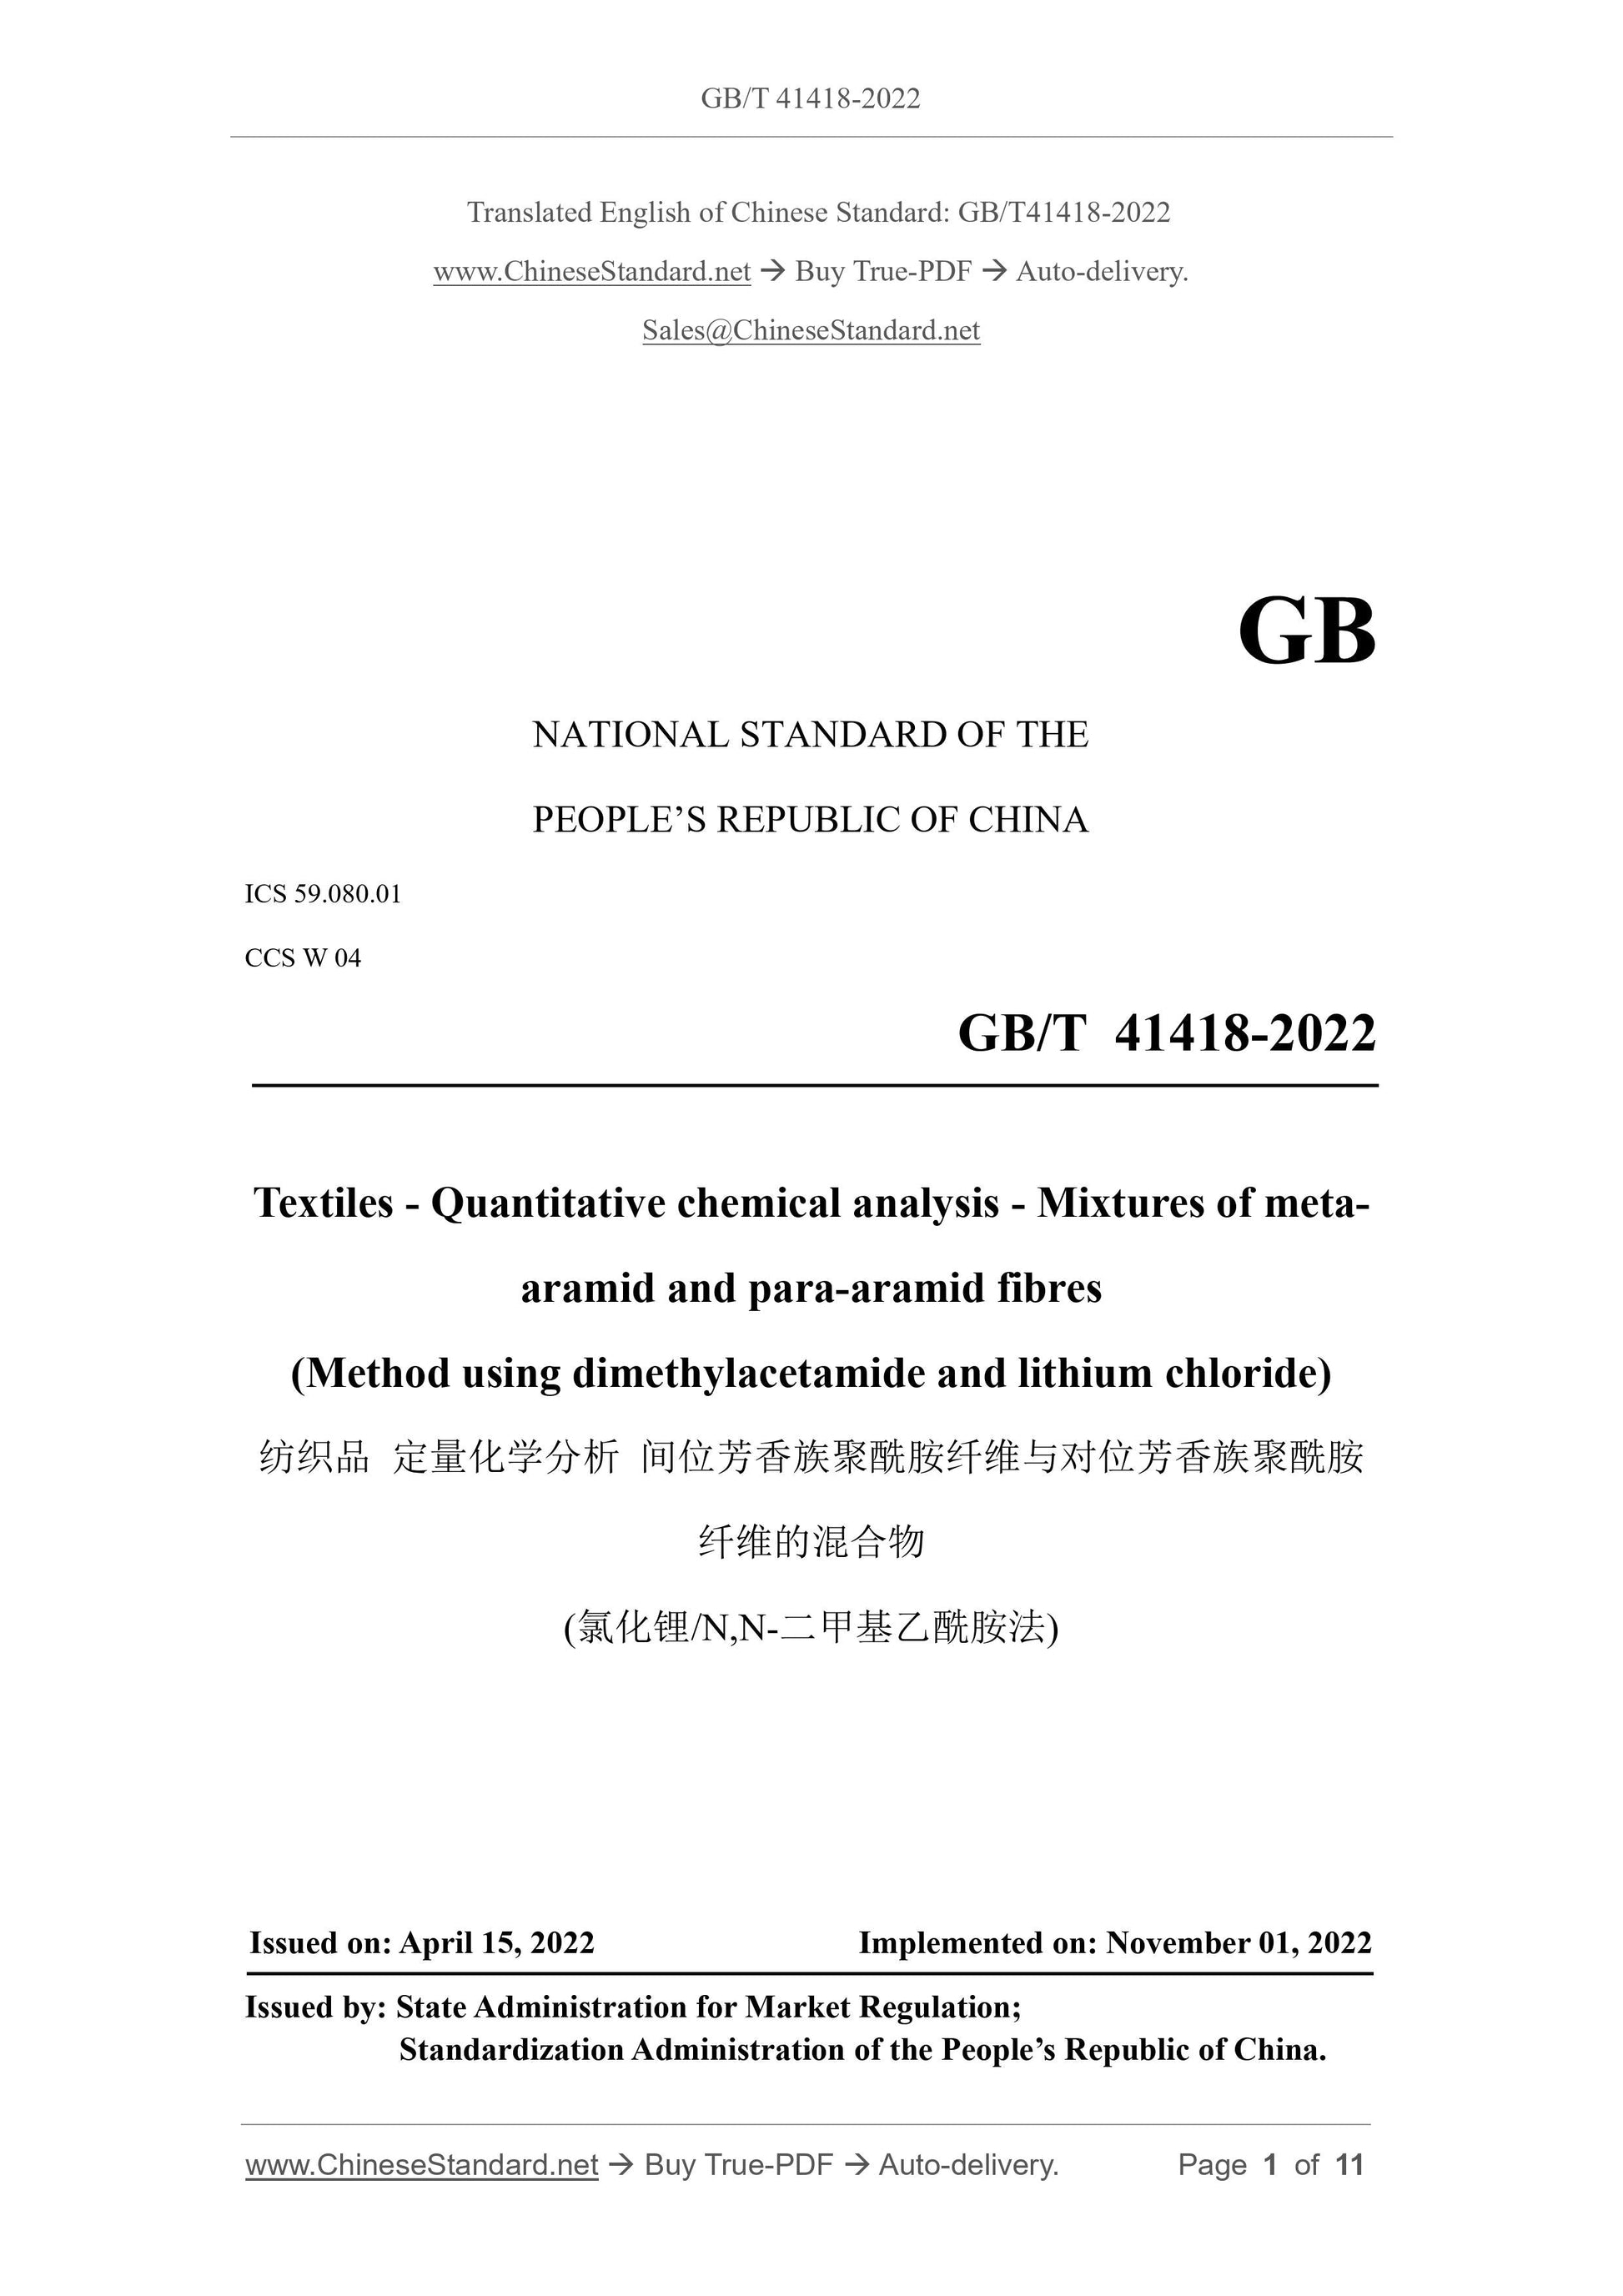 GB/T 41418-2022 Page 1